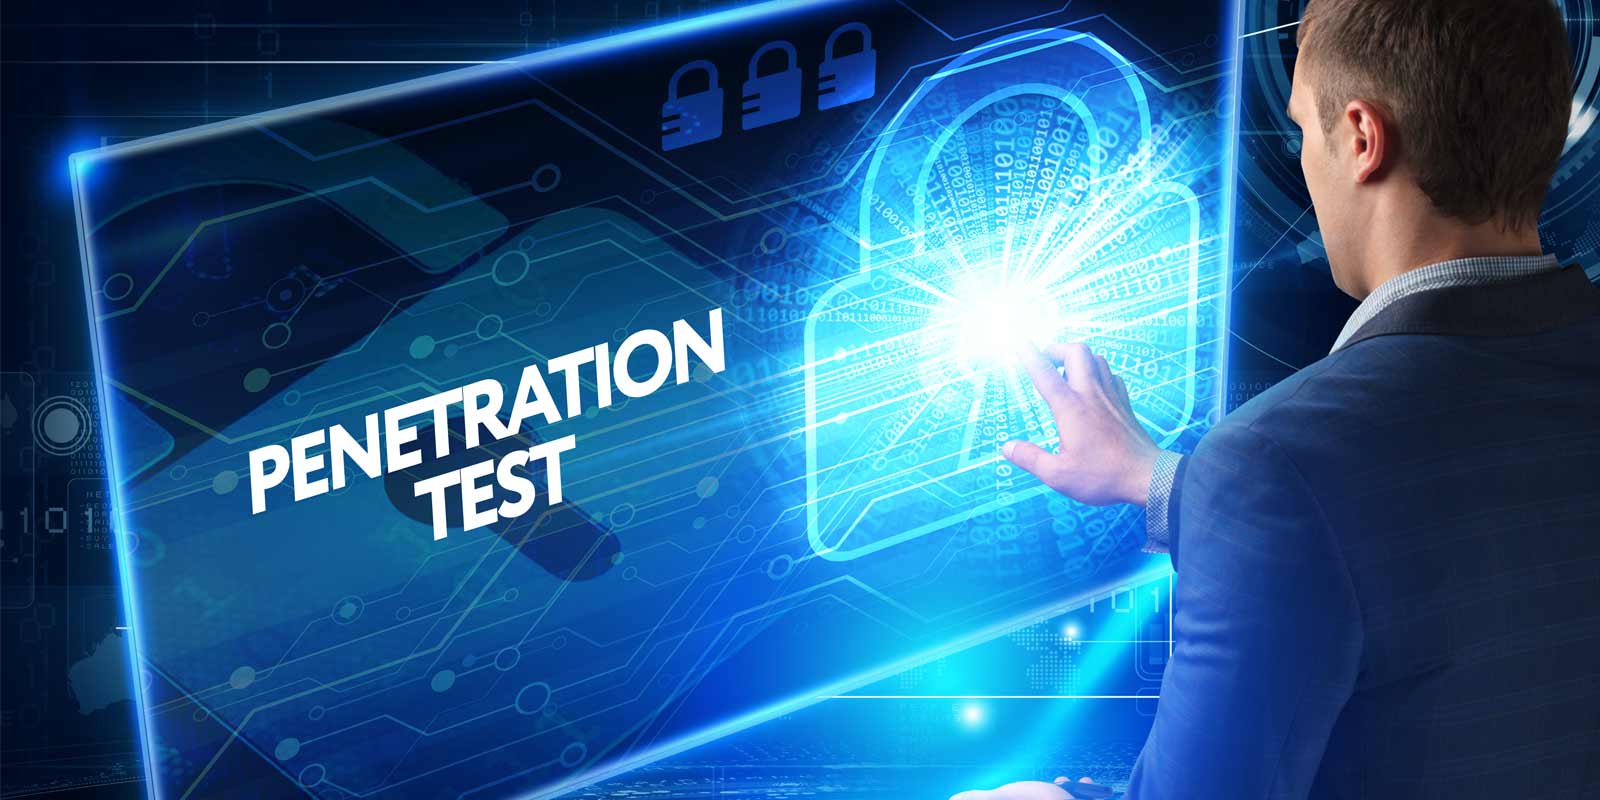 How Frequently Should Penetration Tests Be Performed?